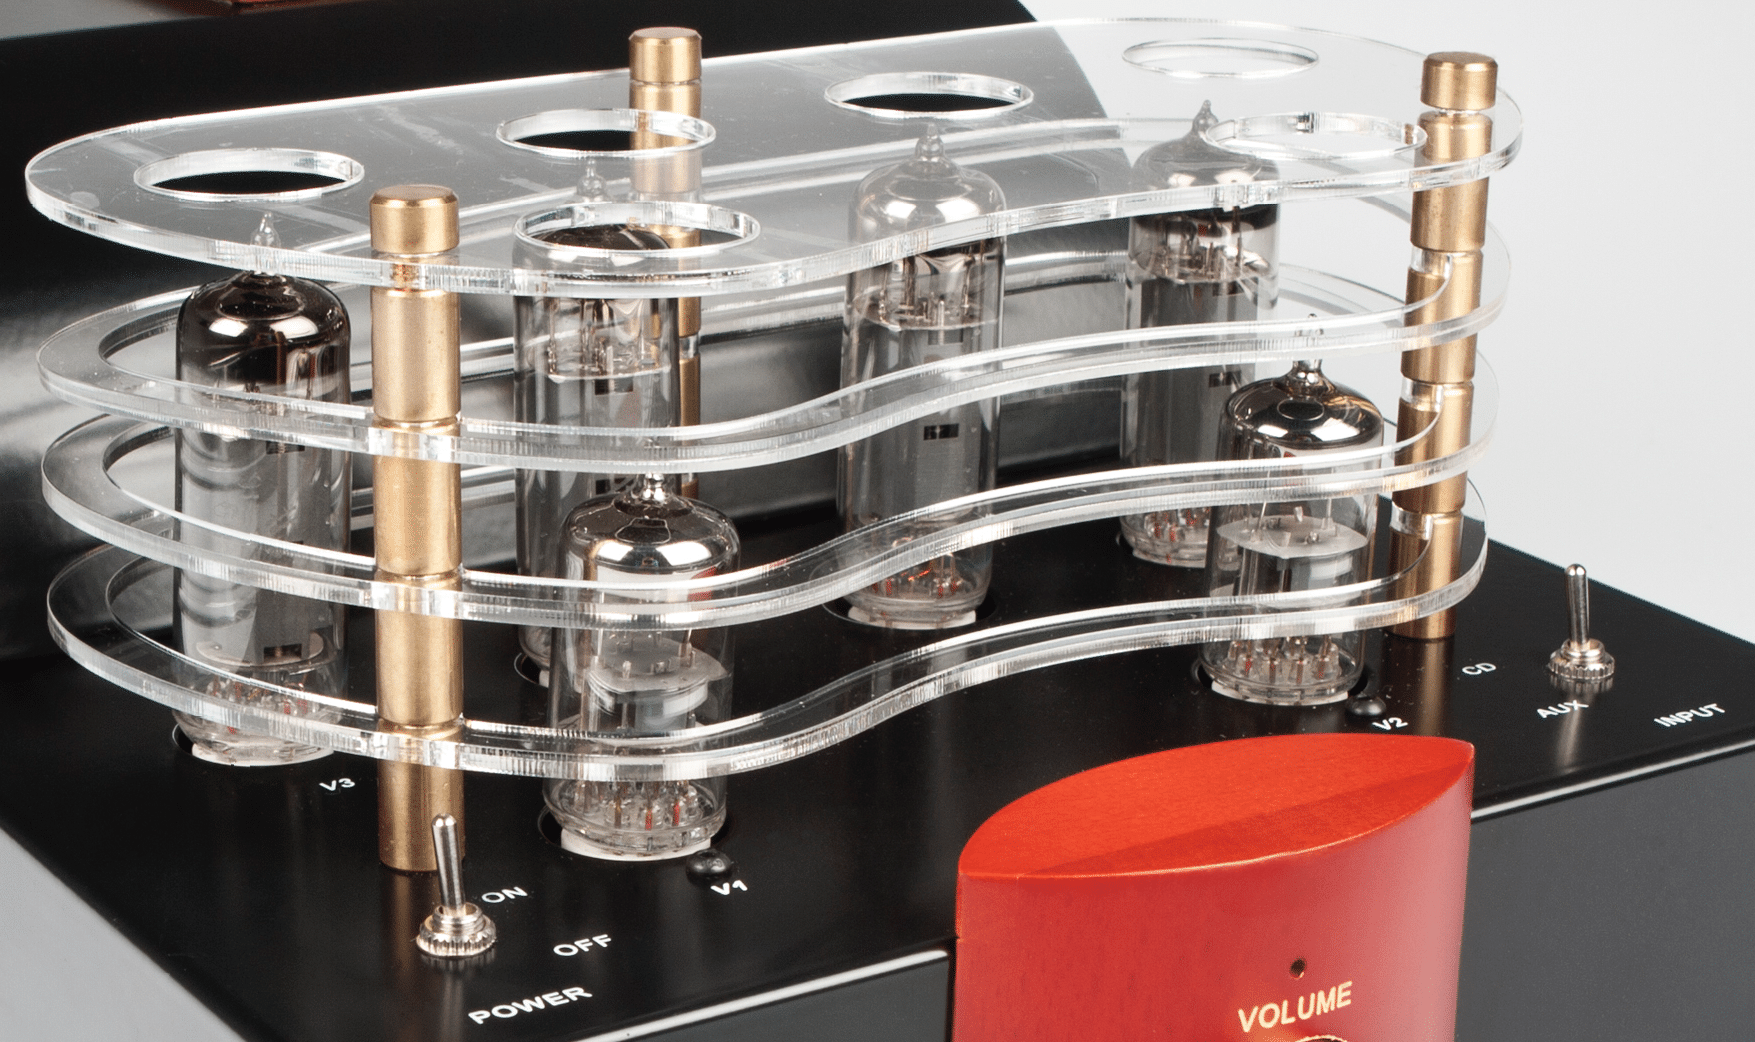 A10 integrated valve amplifier From Pure Sound